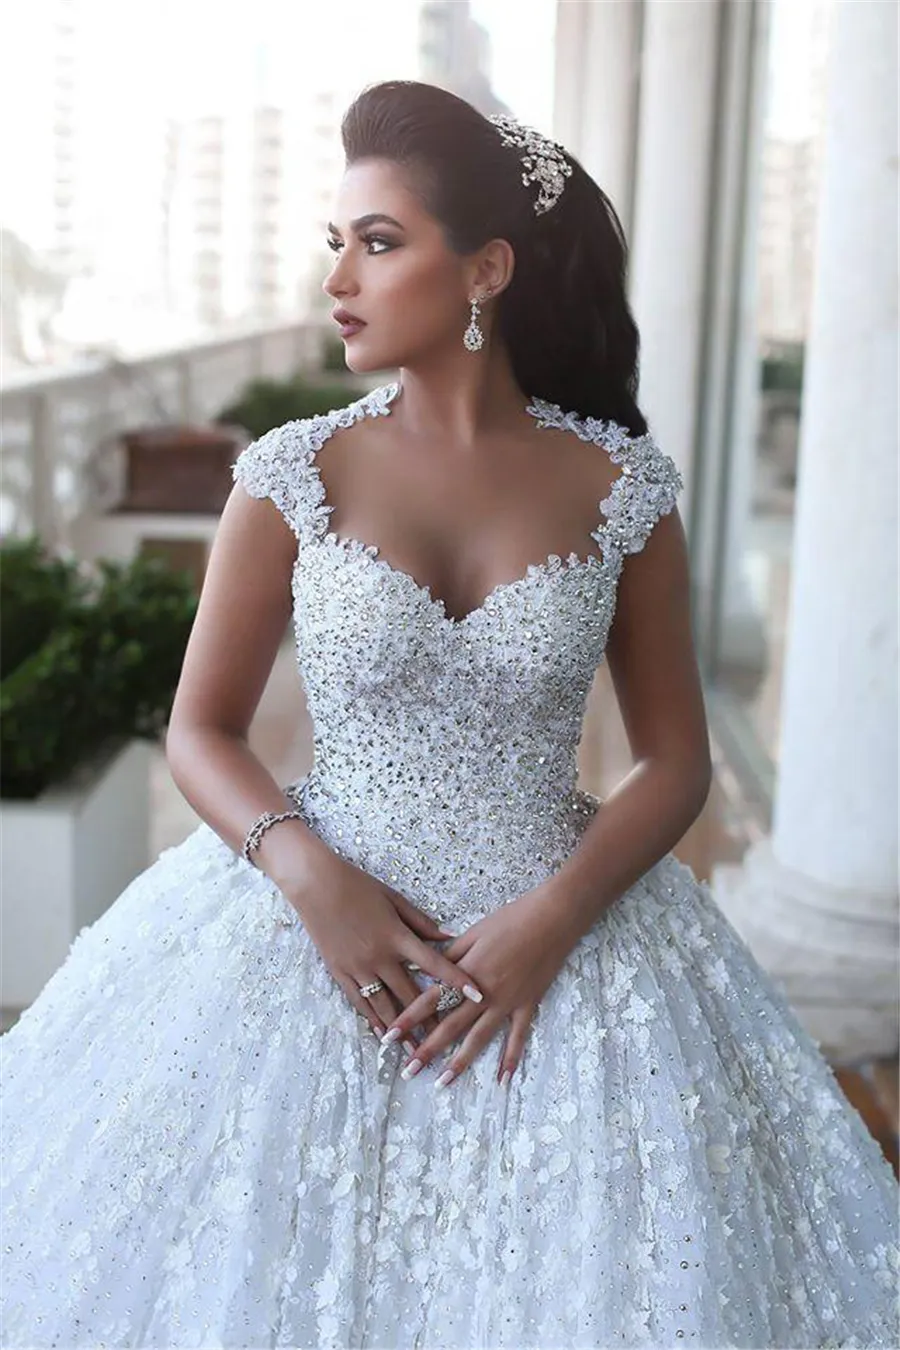 Said Mahamaid Sweetheart Cap Sleeves Arabic Beaded Lace Appliques Novia Bridal Gowns Luxury Ball Gown Illusion Back Wedding Dresses